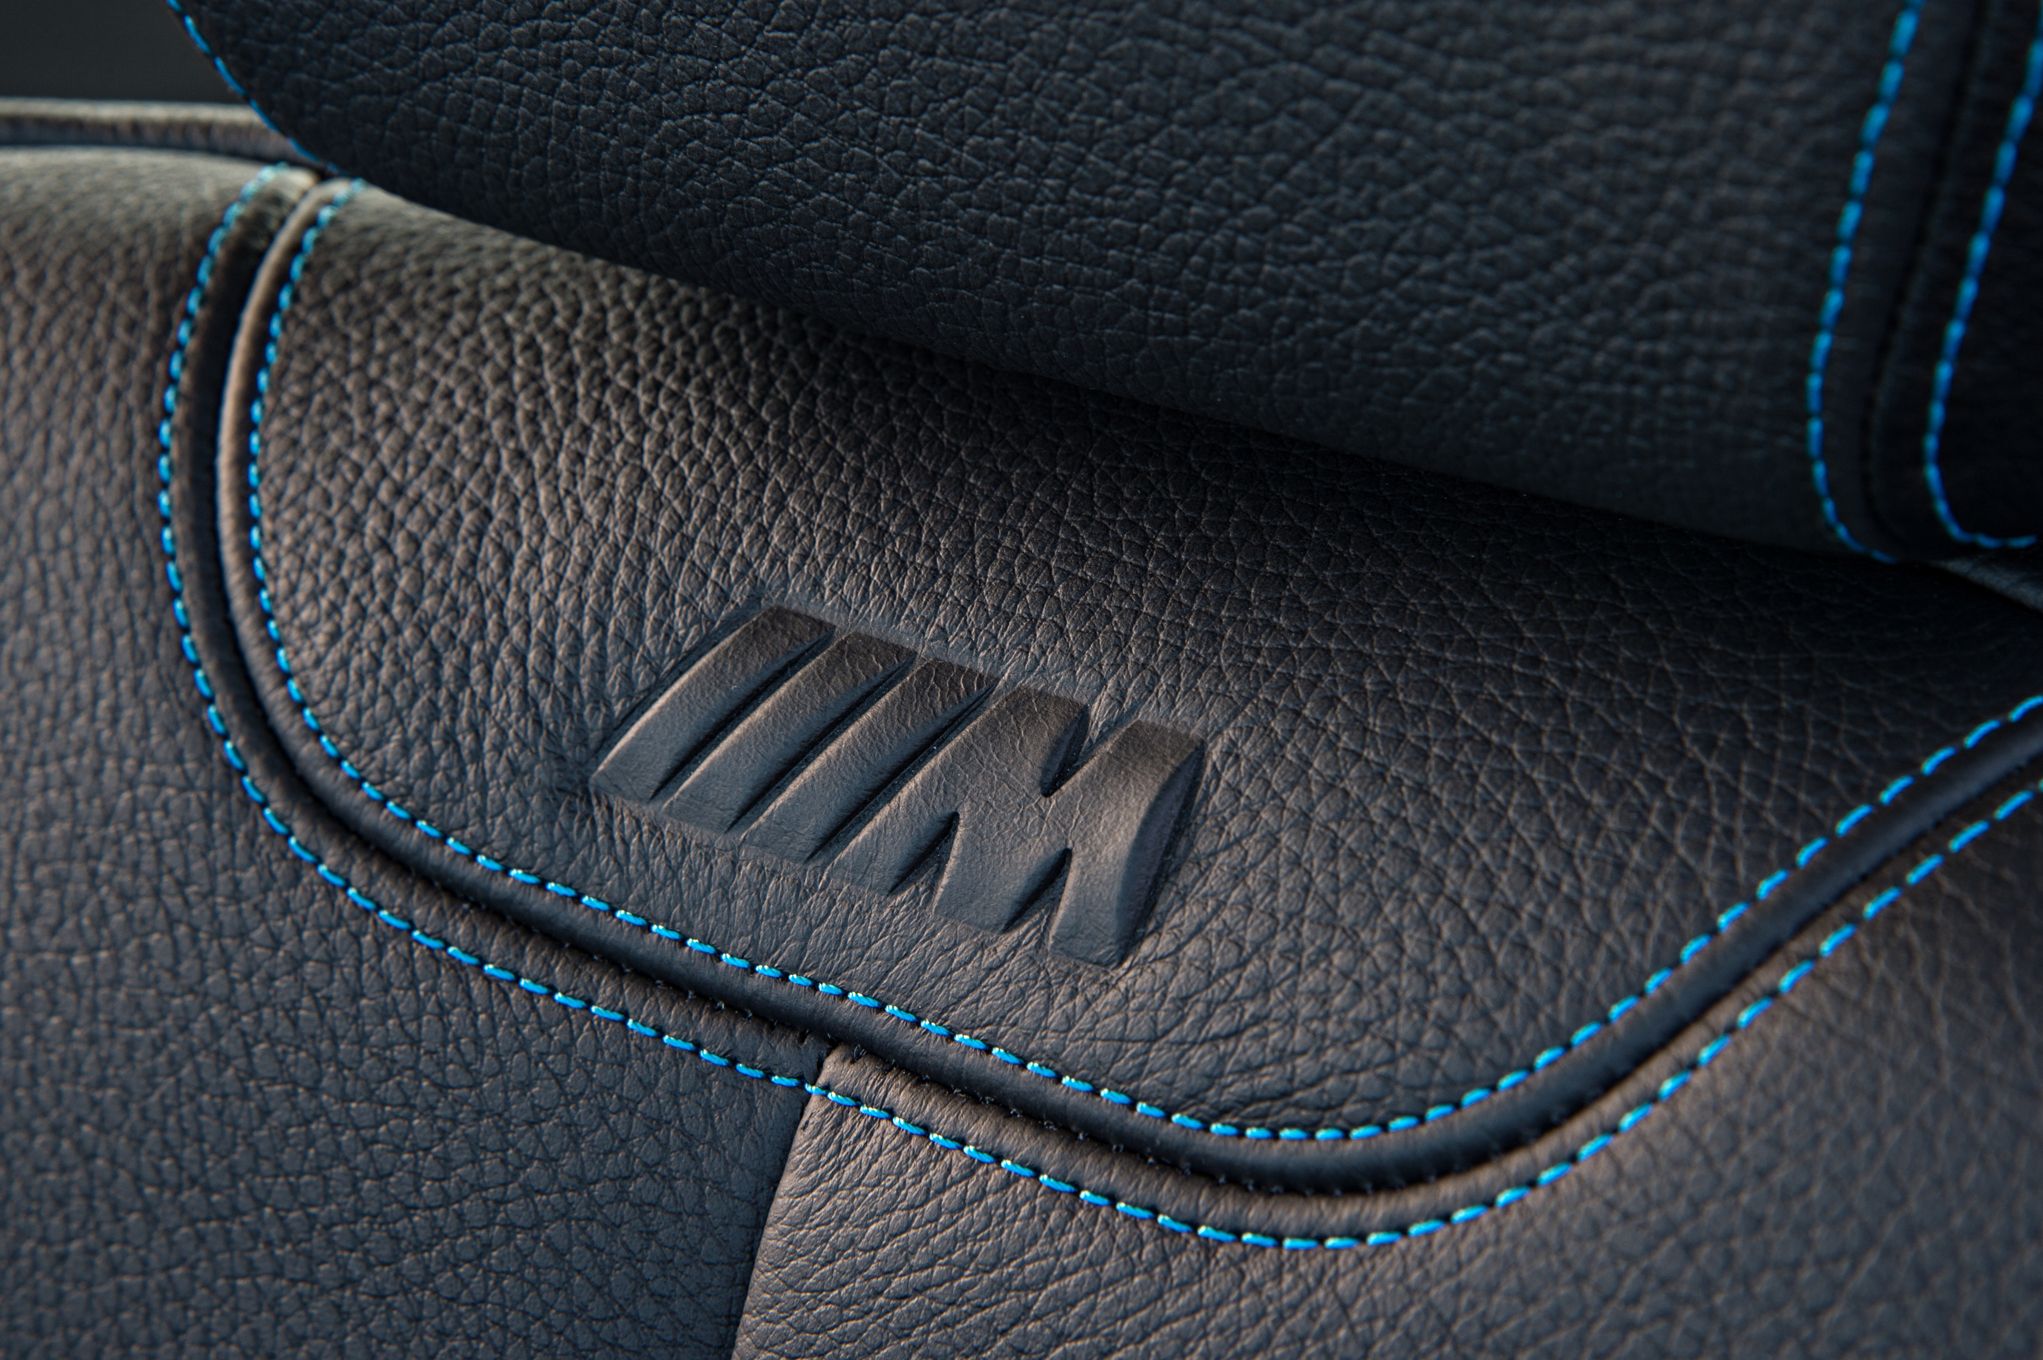 2016 Bmw M2 Interior View Leather Details (View 13 of 61)